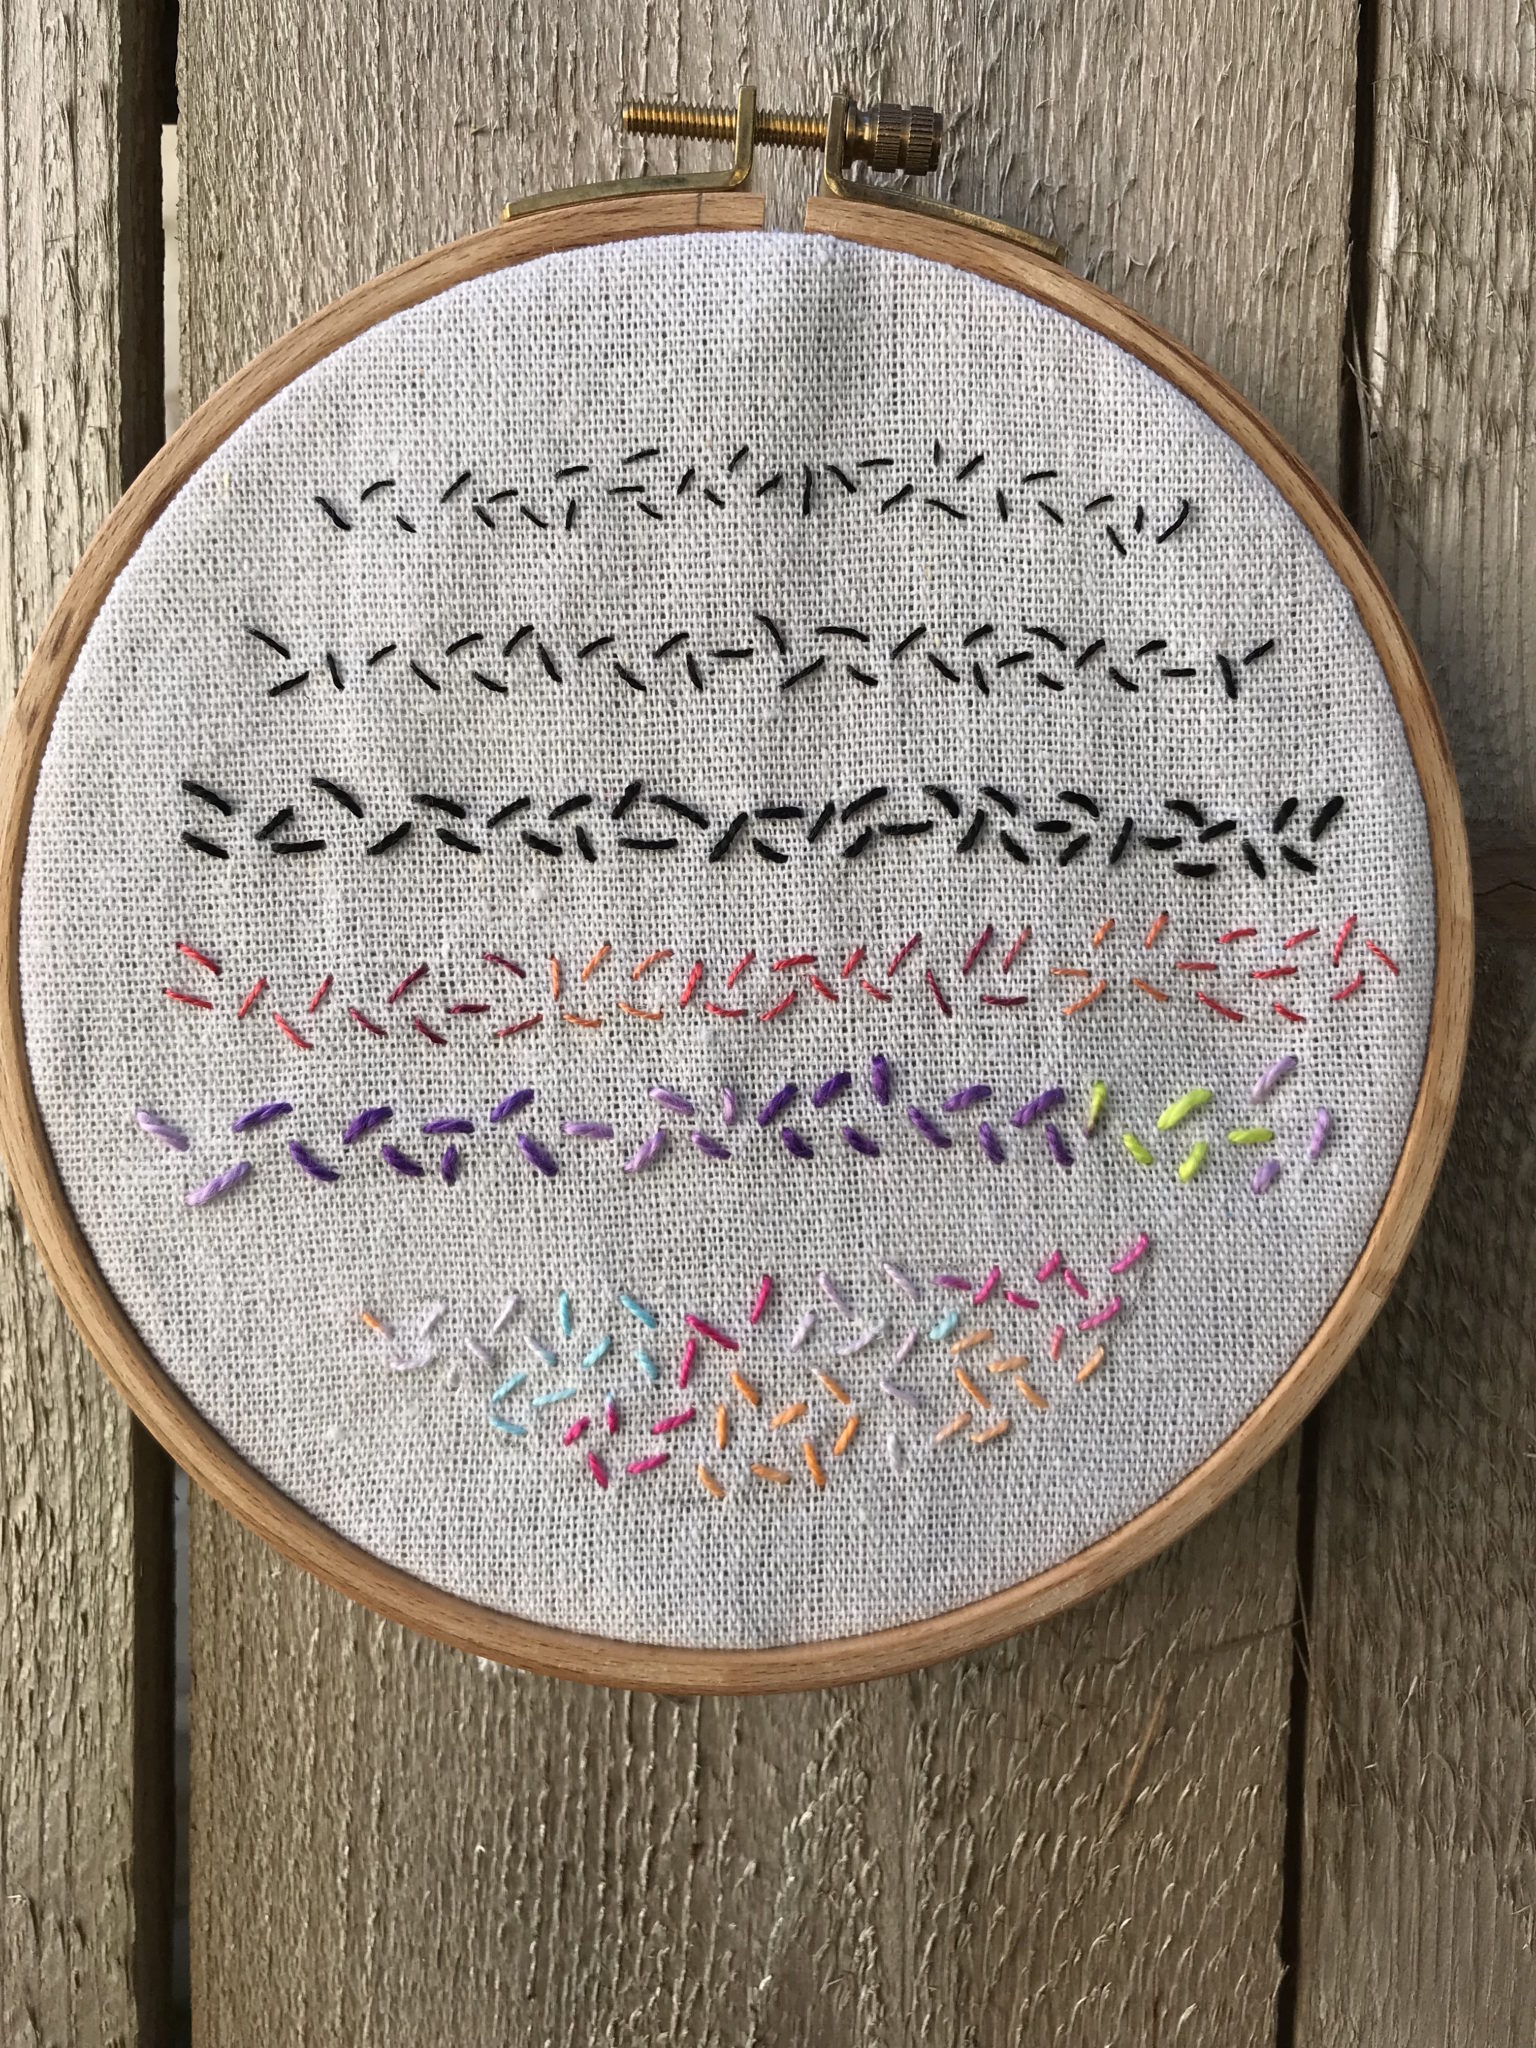 Embroidery: Seed Stitch | Create Whimsy1536 x 2048